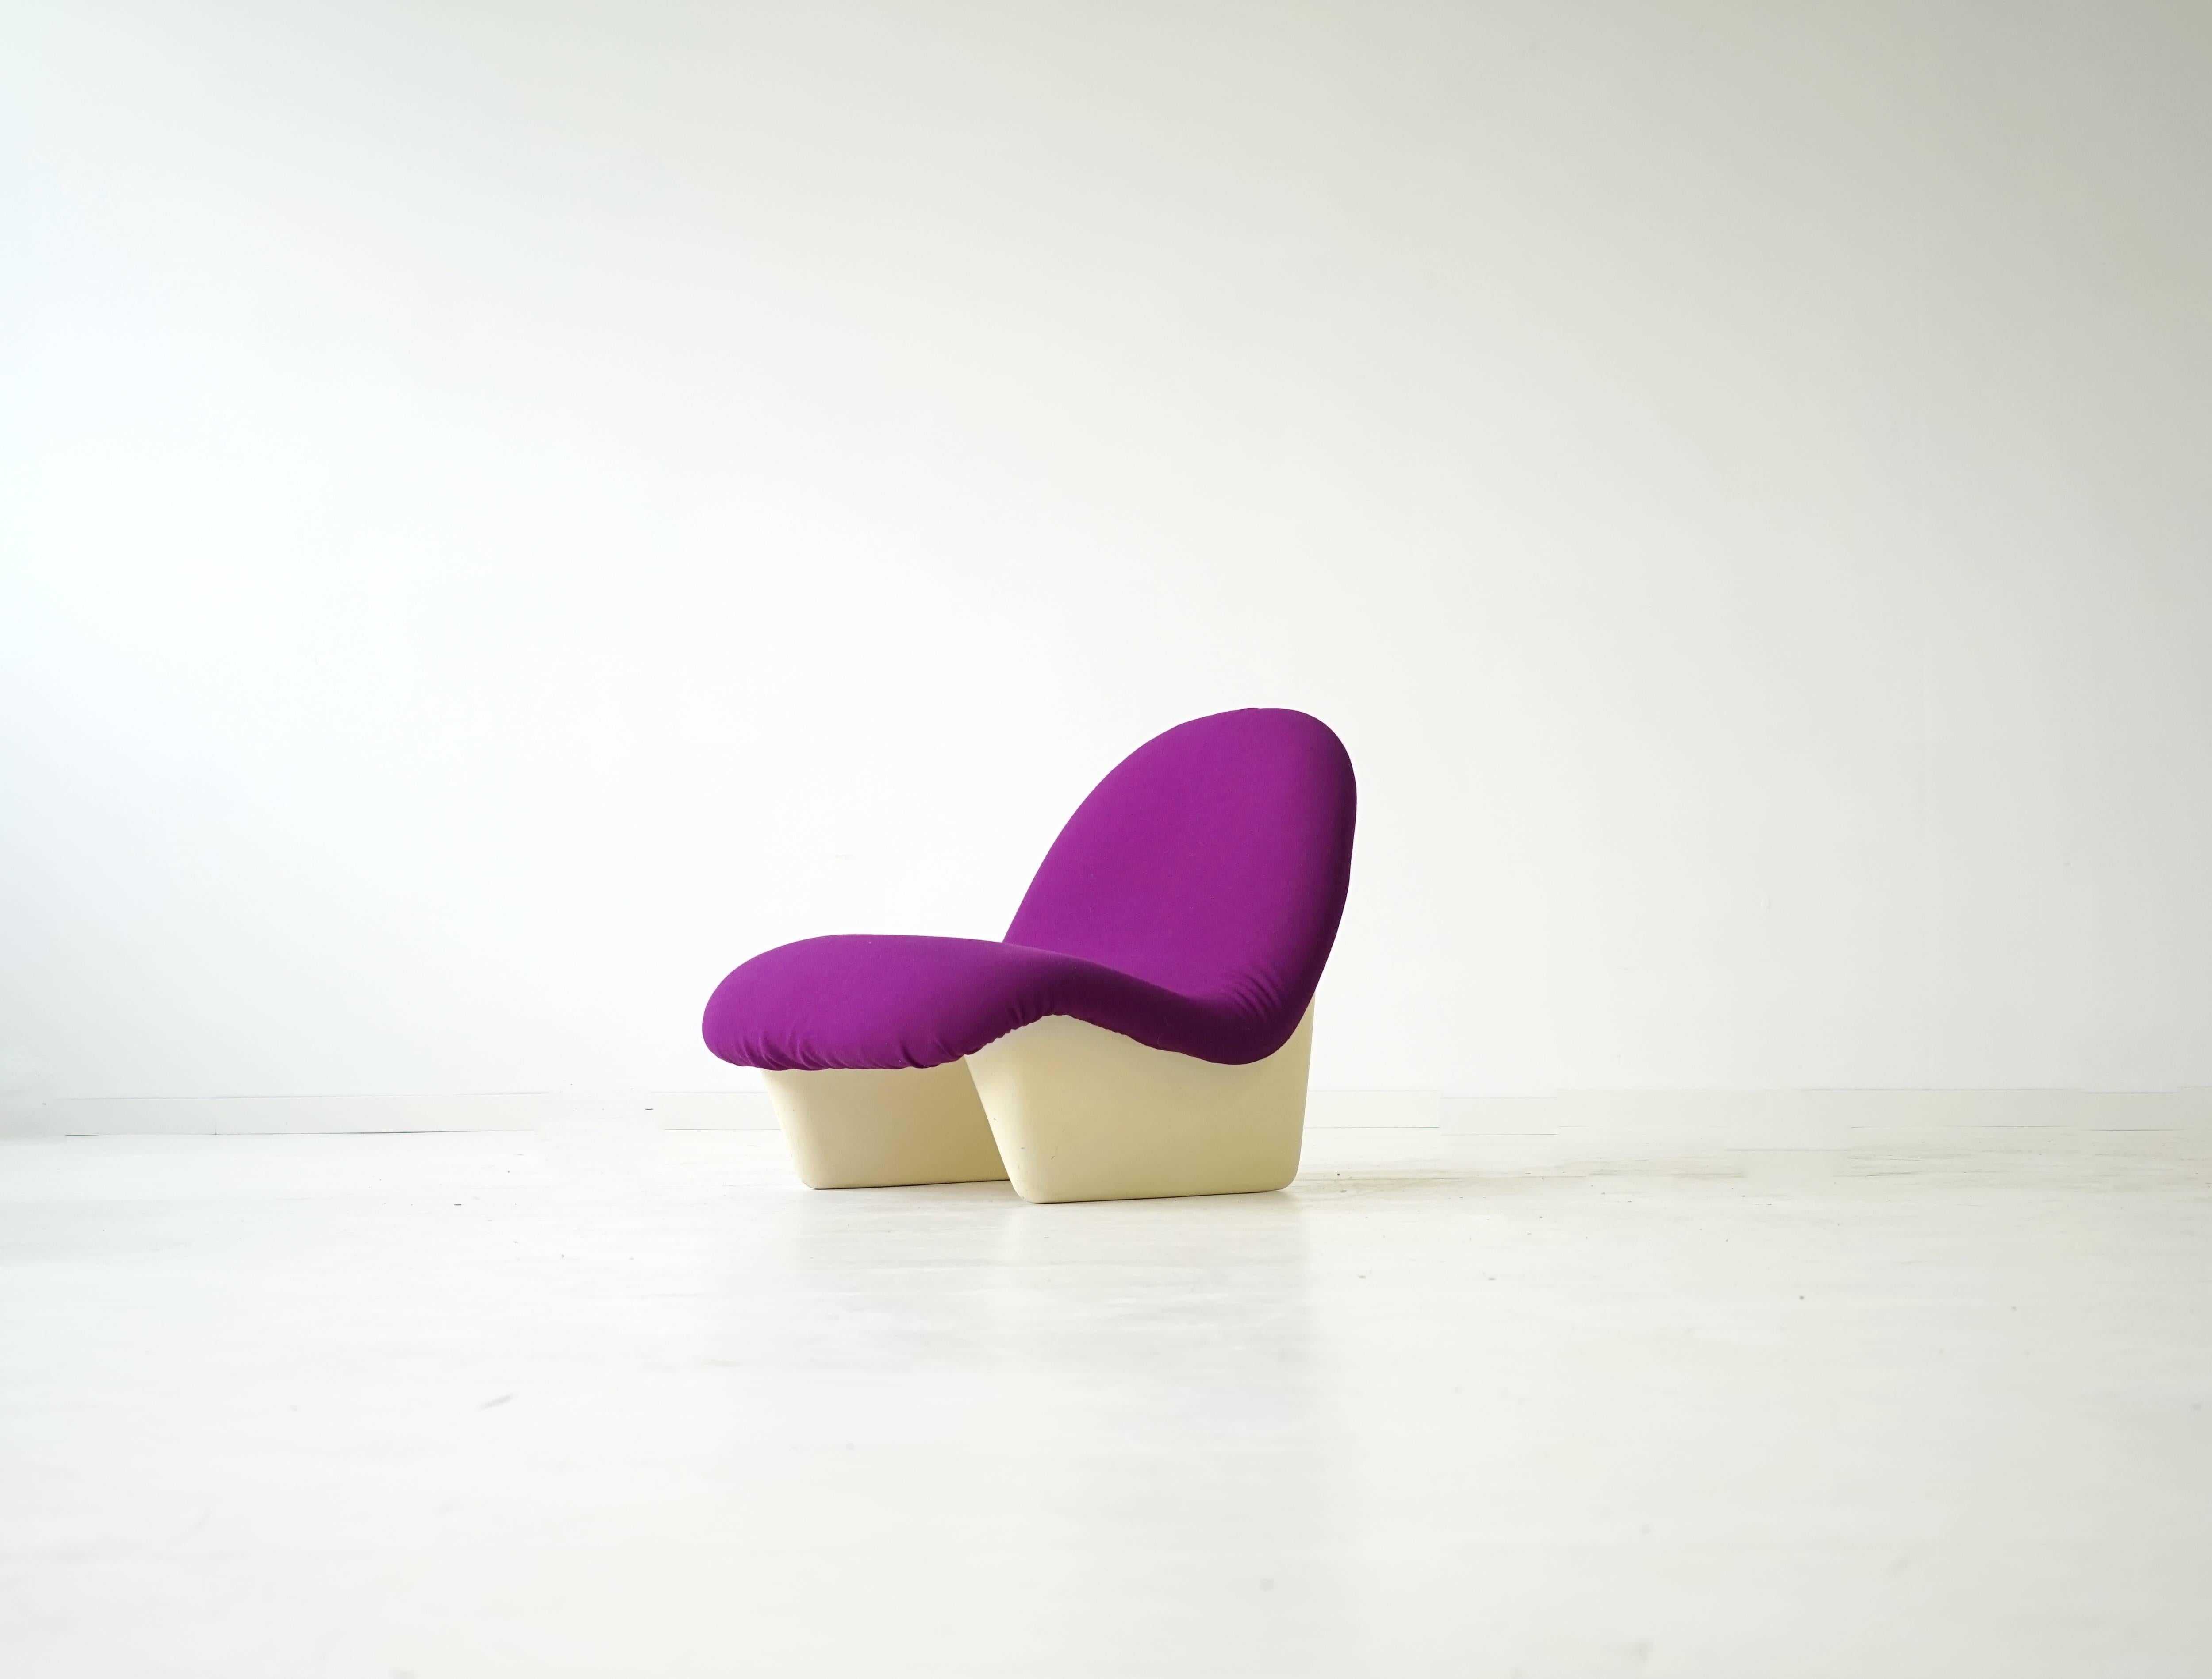 Sadima chairs by Luigi Colani, BASF 1970s, Space Age
Shell in plastic, upholstered in purple fabric.
Perfect condition, early production.